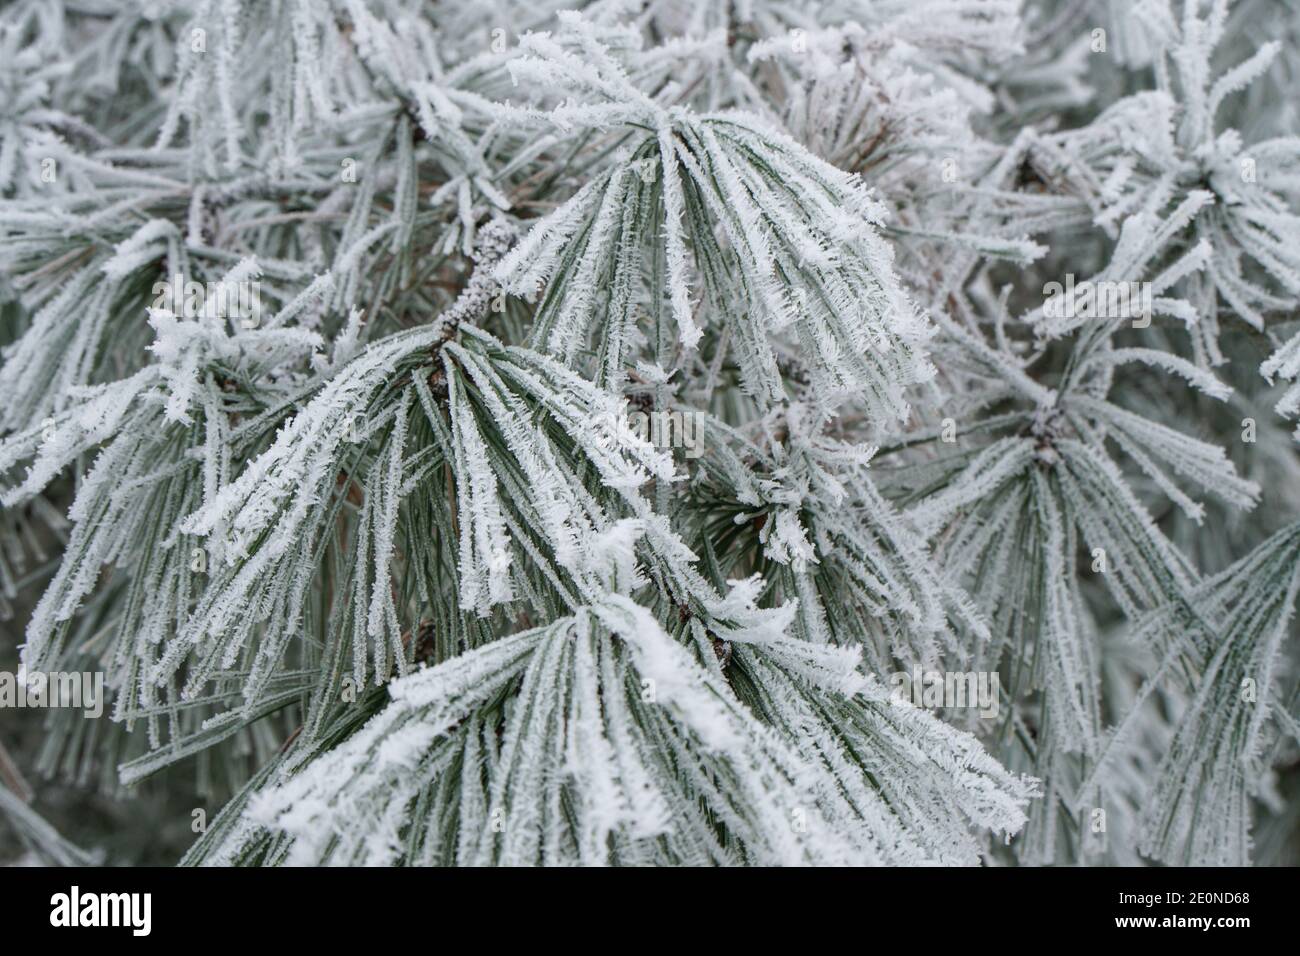 Mortara -12/29/2020: tree pine branches covered with snow Stock Photo